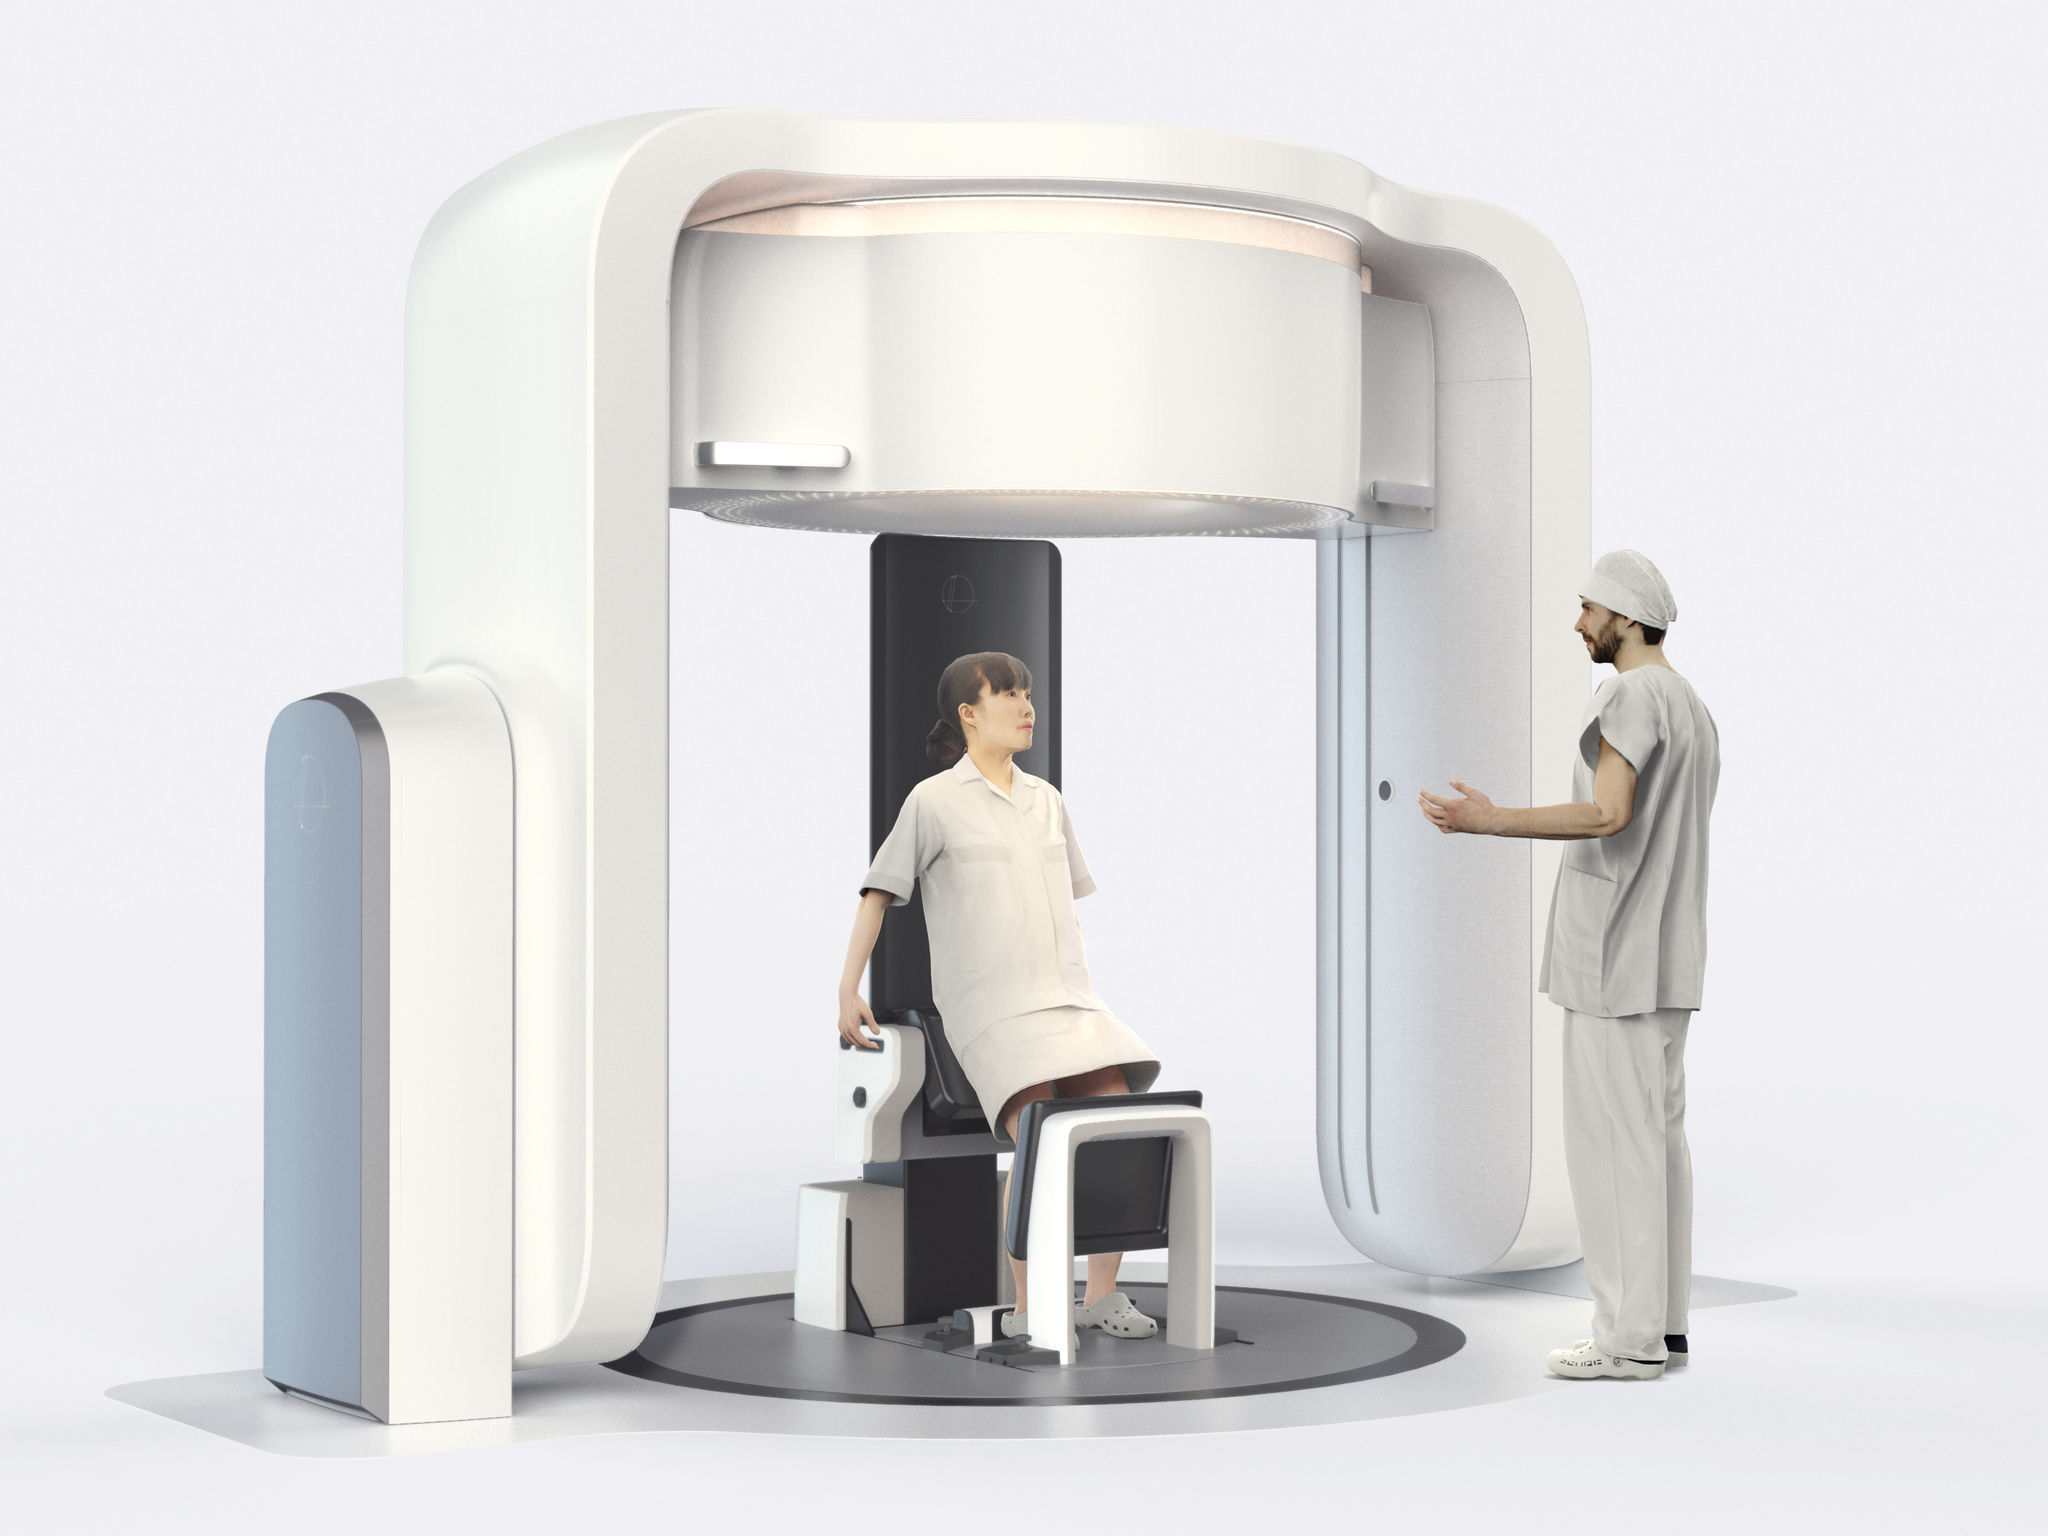 Leo Cancer Care Radiation Therapy System